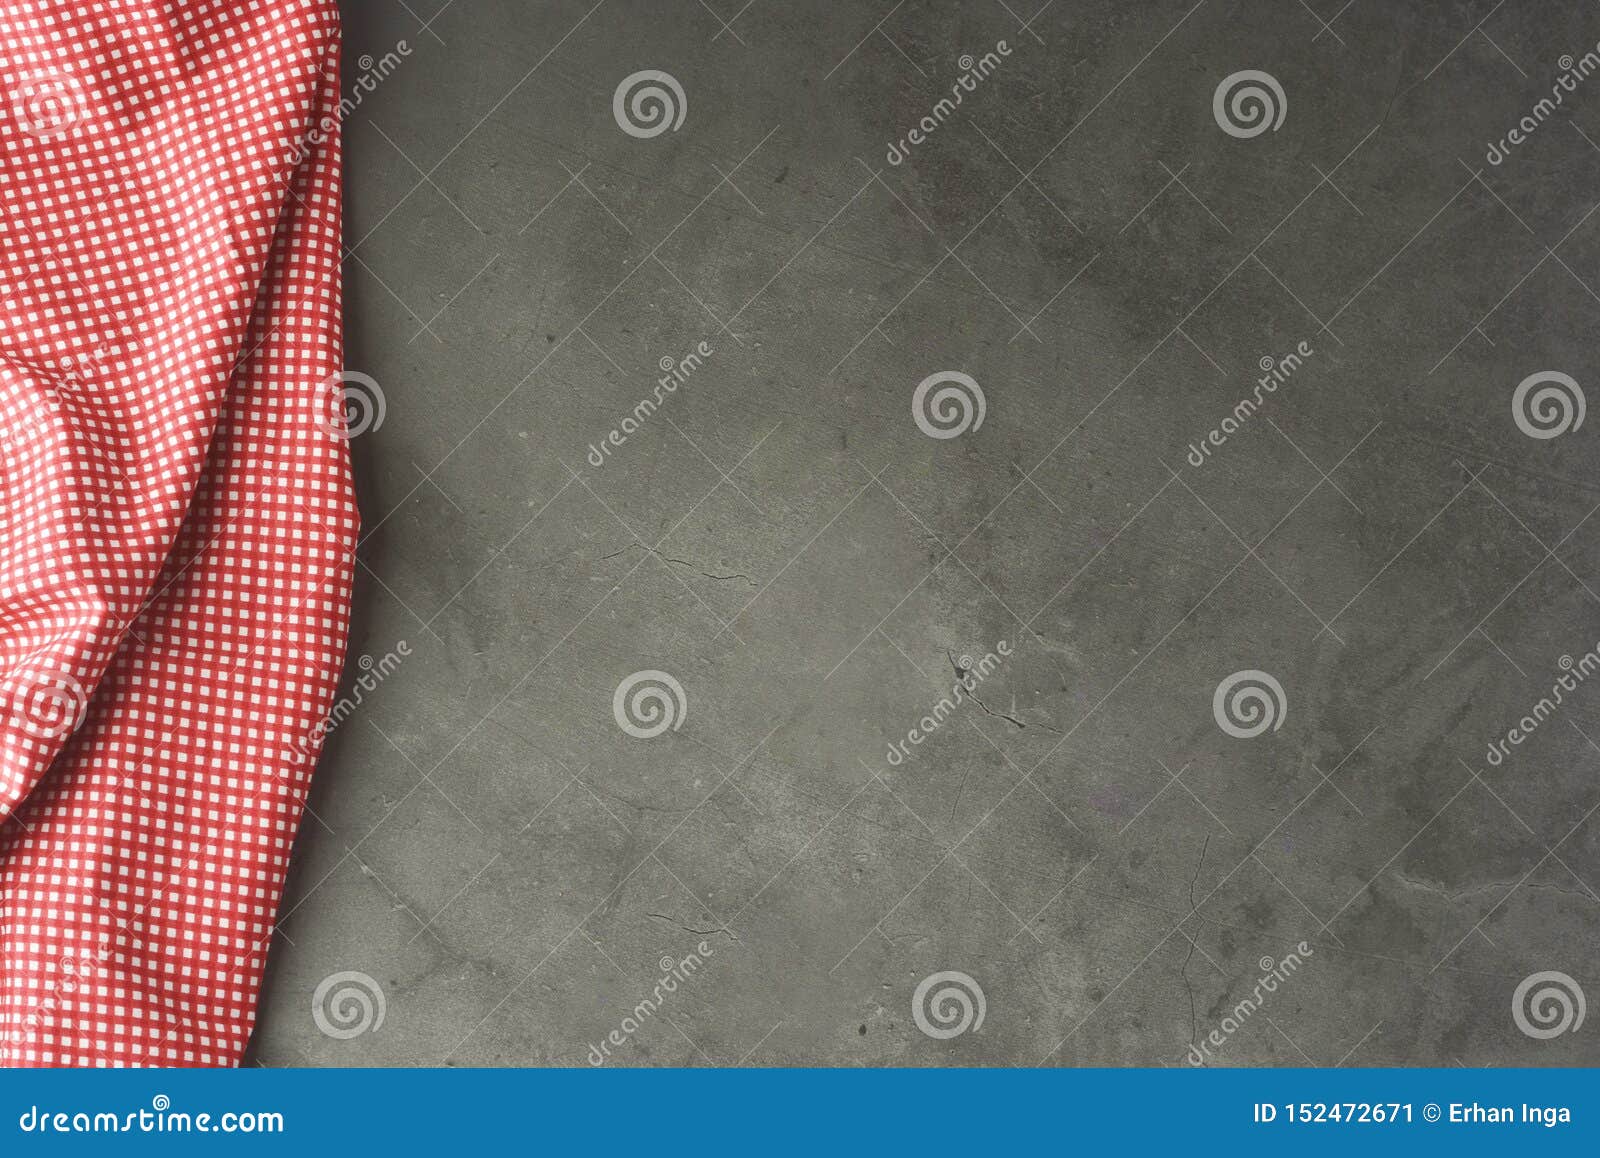 empty mockup for productor food or text. textured grey board with red fabric